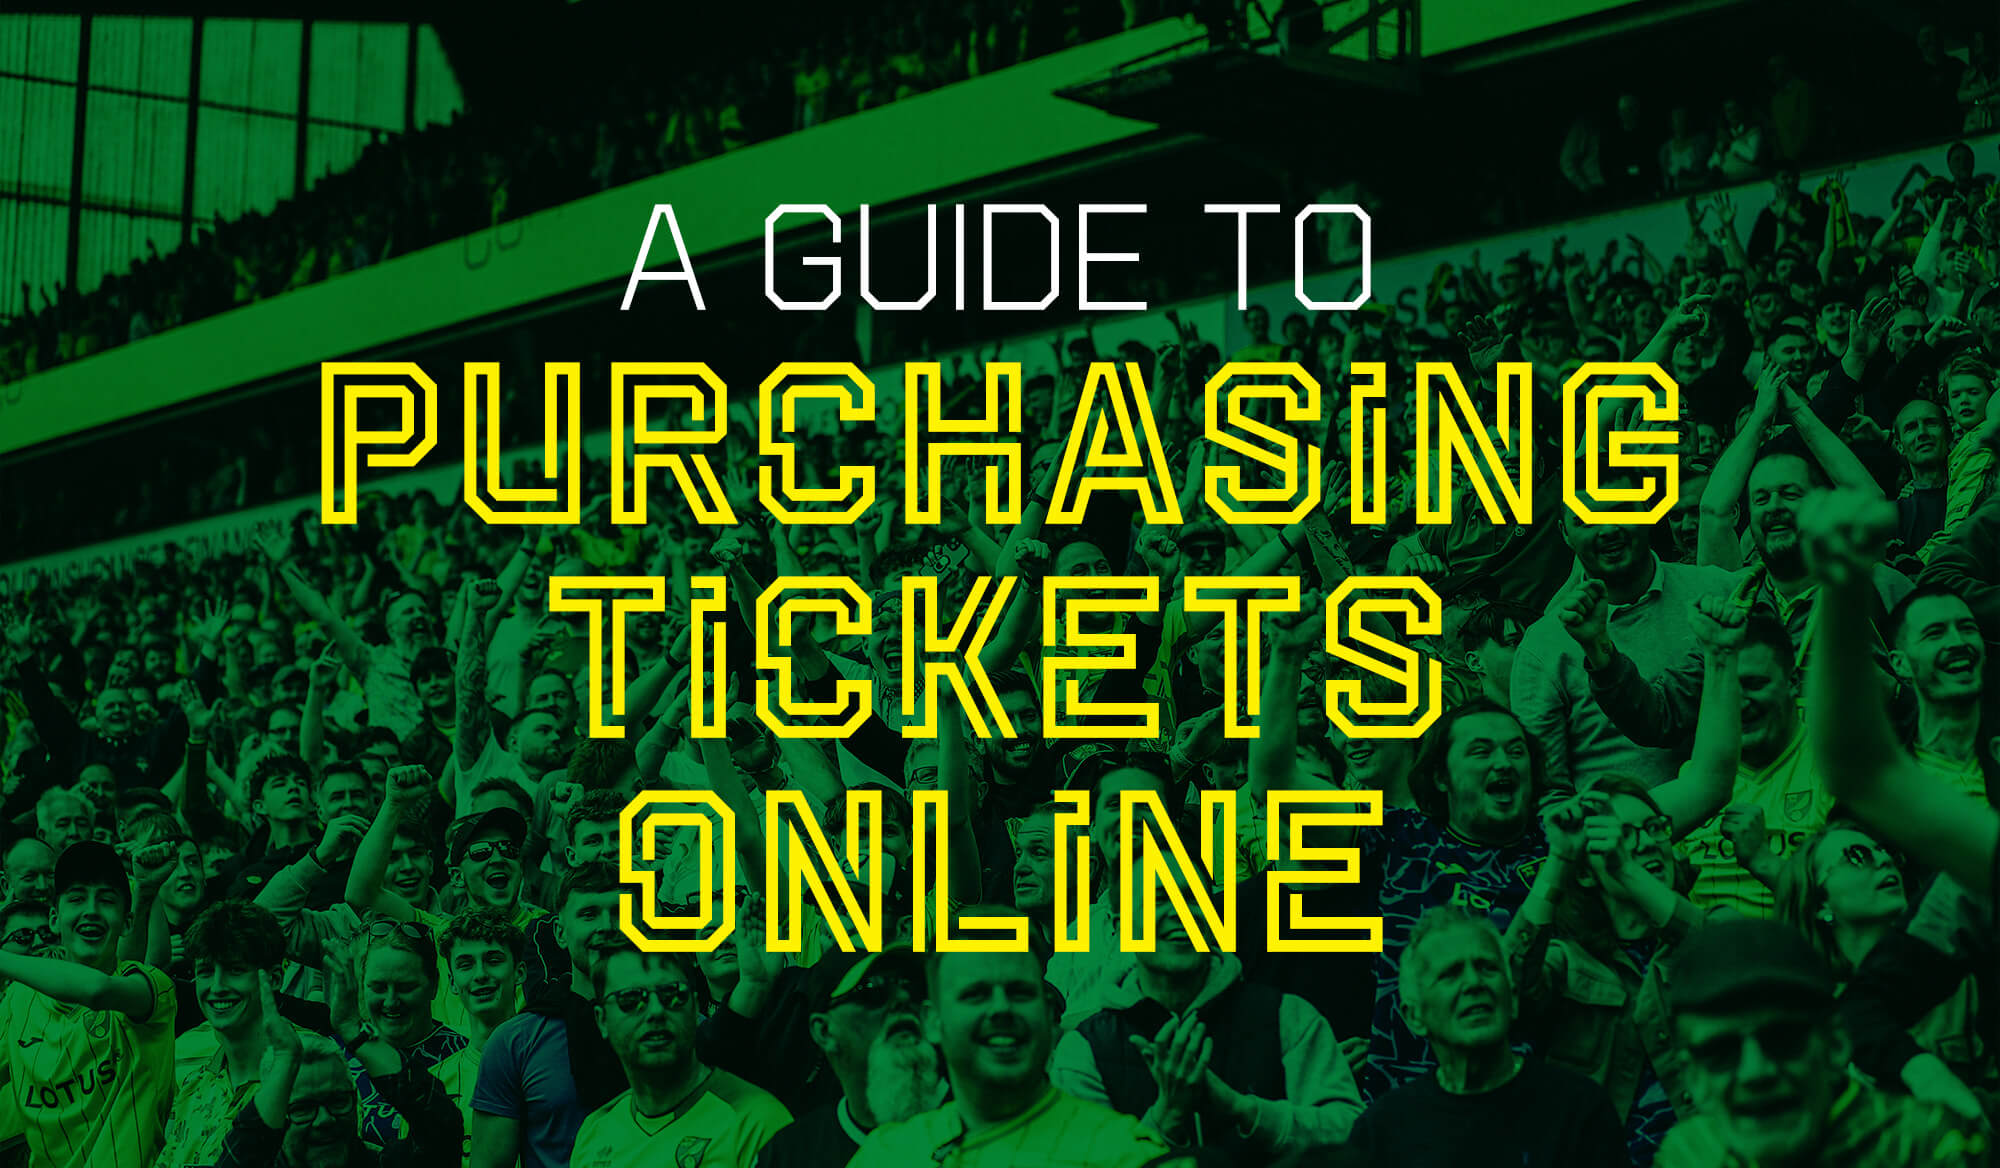 A guide to purchasing tickets